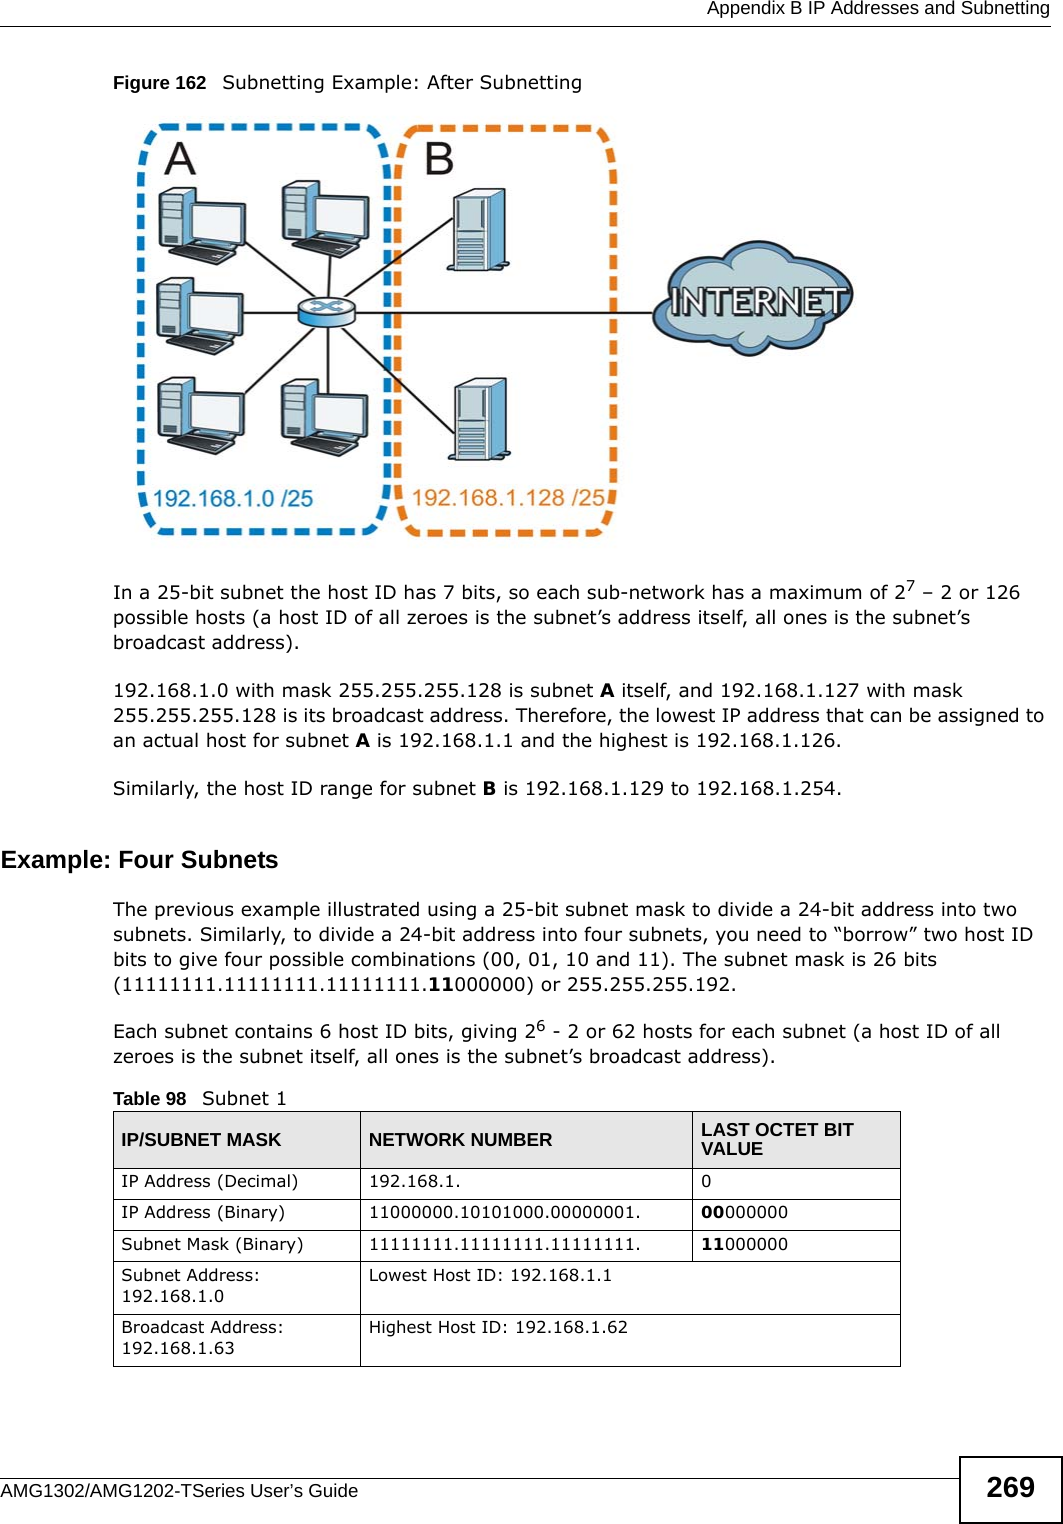  Appendix B IP Addresses and SubnettingAMG1302/AMG1202-TSeries User’s Guide 269Figure 162   Subnetting Example: After SubnettingIn a 25-bit subnet the host ID has 7 bits, so each sub-network has a maximum of 27 – 2 or 126 possible hosts (a host ID of all zeroes is the subnet’s address itself, all ones is the subnet’s broadcast address).192.168.1.0 with mask 255.255.255.128 is subnet A itself, and 192.168.1.127 with mask 255.255.255.128 is its broadcast address. Therefore, the lowest IP address that can be assigned to an actual host for subnet A is 192.168.1.1 and the highest is 192.168.1.126. Similarly, the host ID range for subnet B is 192.168.1.129 to 192.168.1.254.Example: Four Subnets The previous example illustrated using a 25-bit subnet mask to divide a 24-bit address into two subnets. Similarly, to divide a 24-bit address into four subnets, you need to “borrow” two host ID bits to give four possible combinations (00, 01, 10 and 11). The subnet mask is 26 bits (11111111.11111111.11111111.11000000) or 255.255.255.192. Each subnet contains 6 host ID bits, giving 26 - 2 or 62 hosts for each subnet (a host ID of all zeroes is the subnet itself, all ones is the subnet’s broadcast address). Table 98   Subnet 1IP/SUBNET MASK NETWORK NUMBER LAST OCTET BIT VALUEIP Address (Decimal) 192.168.1. 0IP Address (Binary) 11000000.10101000.00000001. 00000000Subnet Mask (Binary) 11111111.11111111.11111111. 11000000Subnet Address: 192.168.1.0Lowest Host ID: 192.168.1.1Broadcast Address: 192.168.1.63Highest Host ID: 192.168.1.62